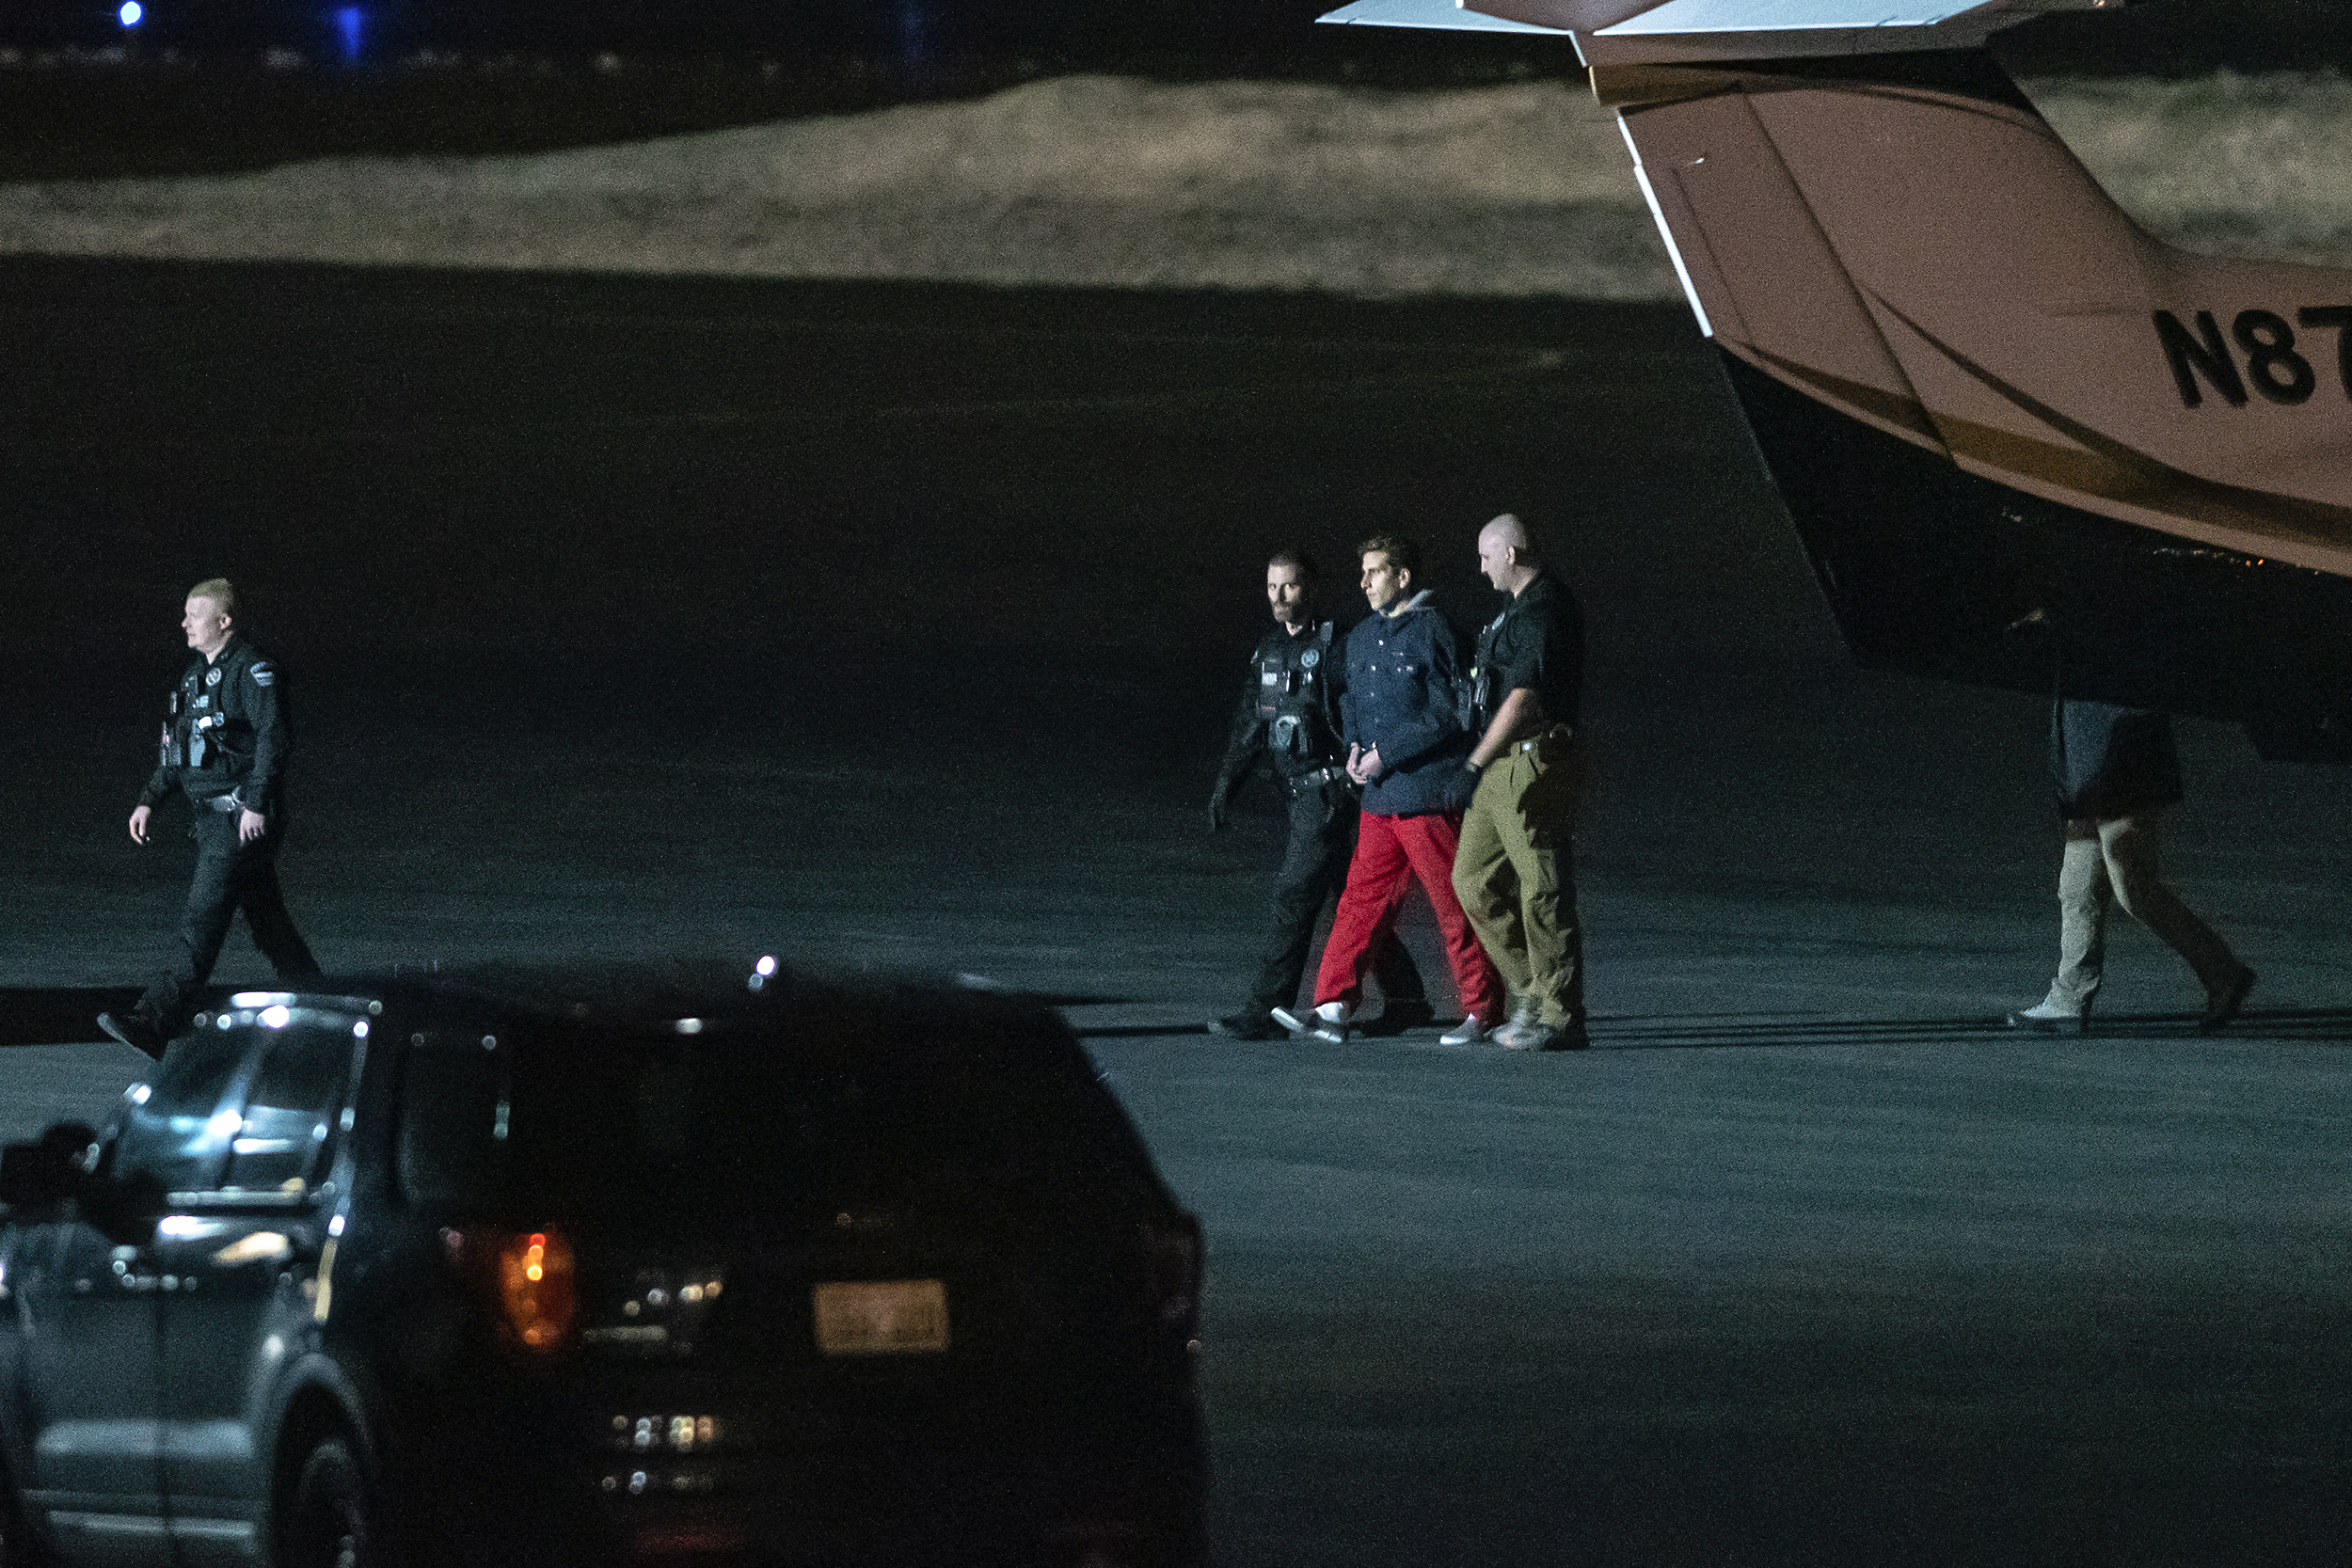 Bryan Kohberger is escorted by law enforcement after arriving at Pullman-Moscow Regional Airport in Pullman, Washington, on Thursday.